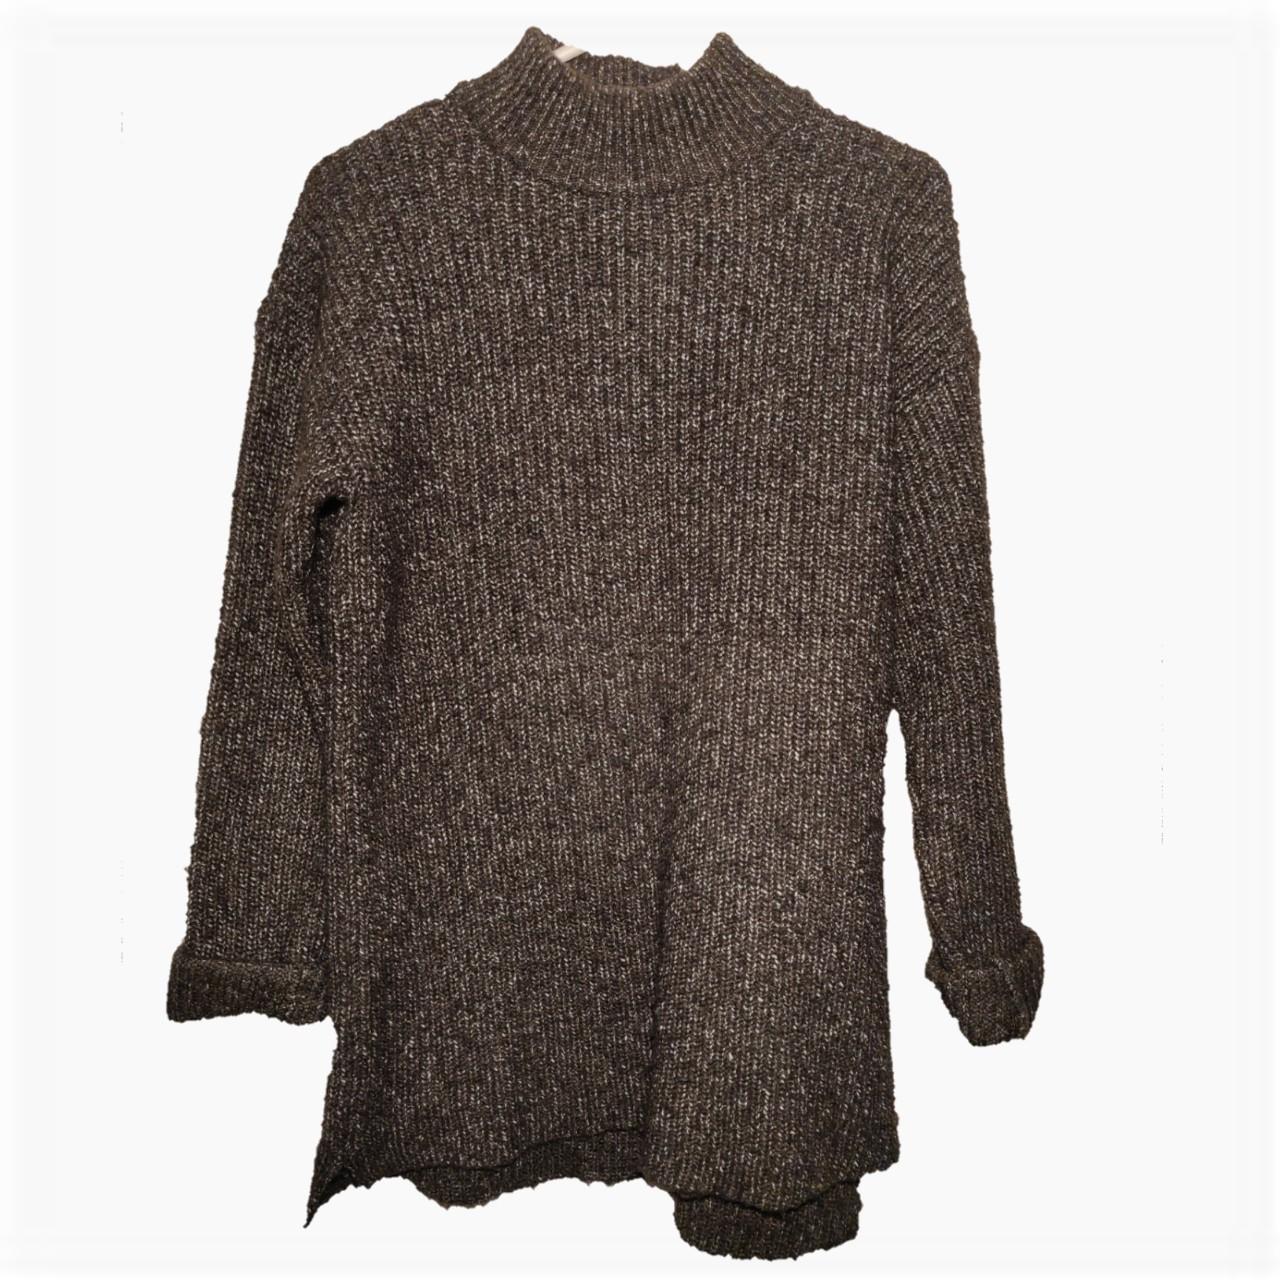 Shore Leave Urban Outfitters knitwear high neck... - Depop